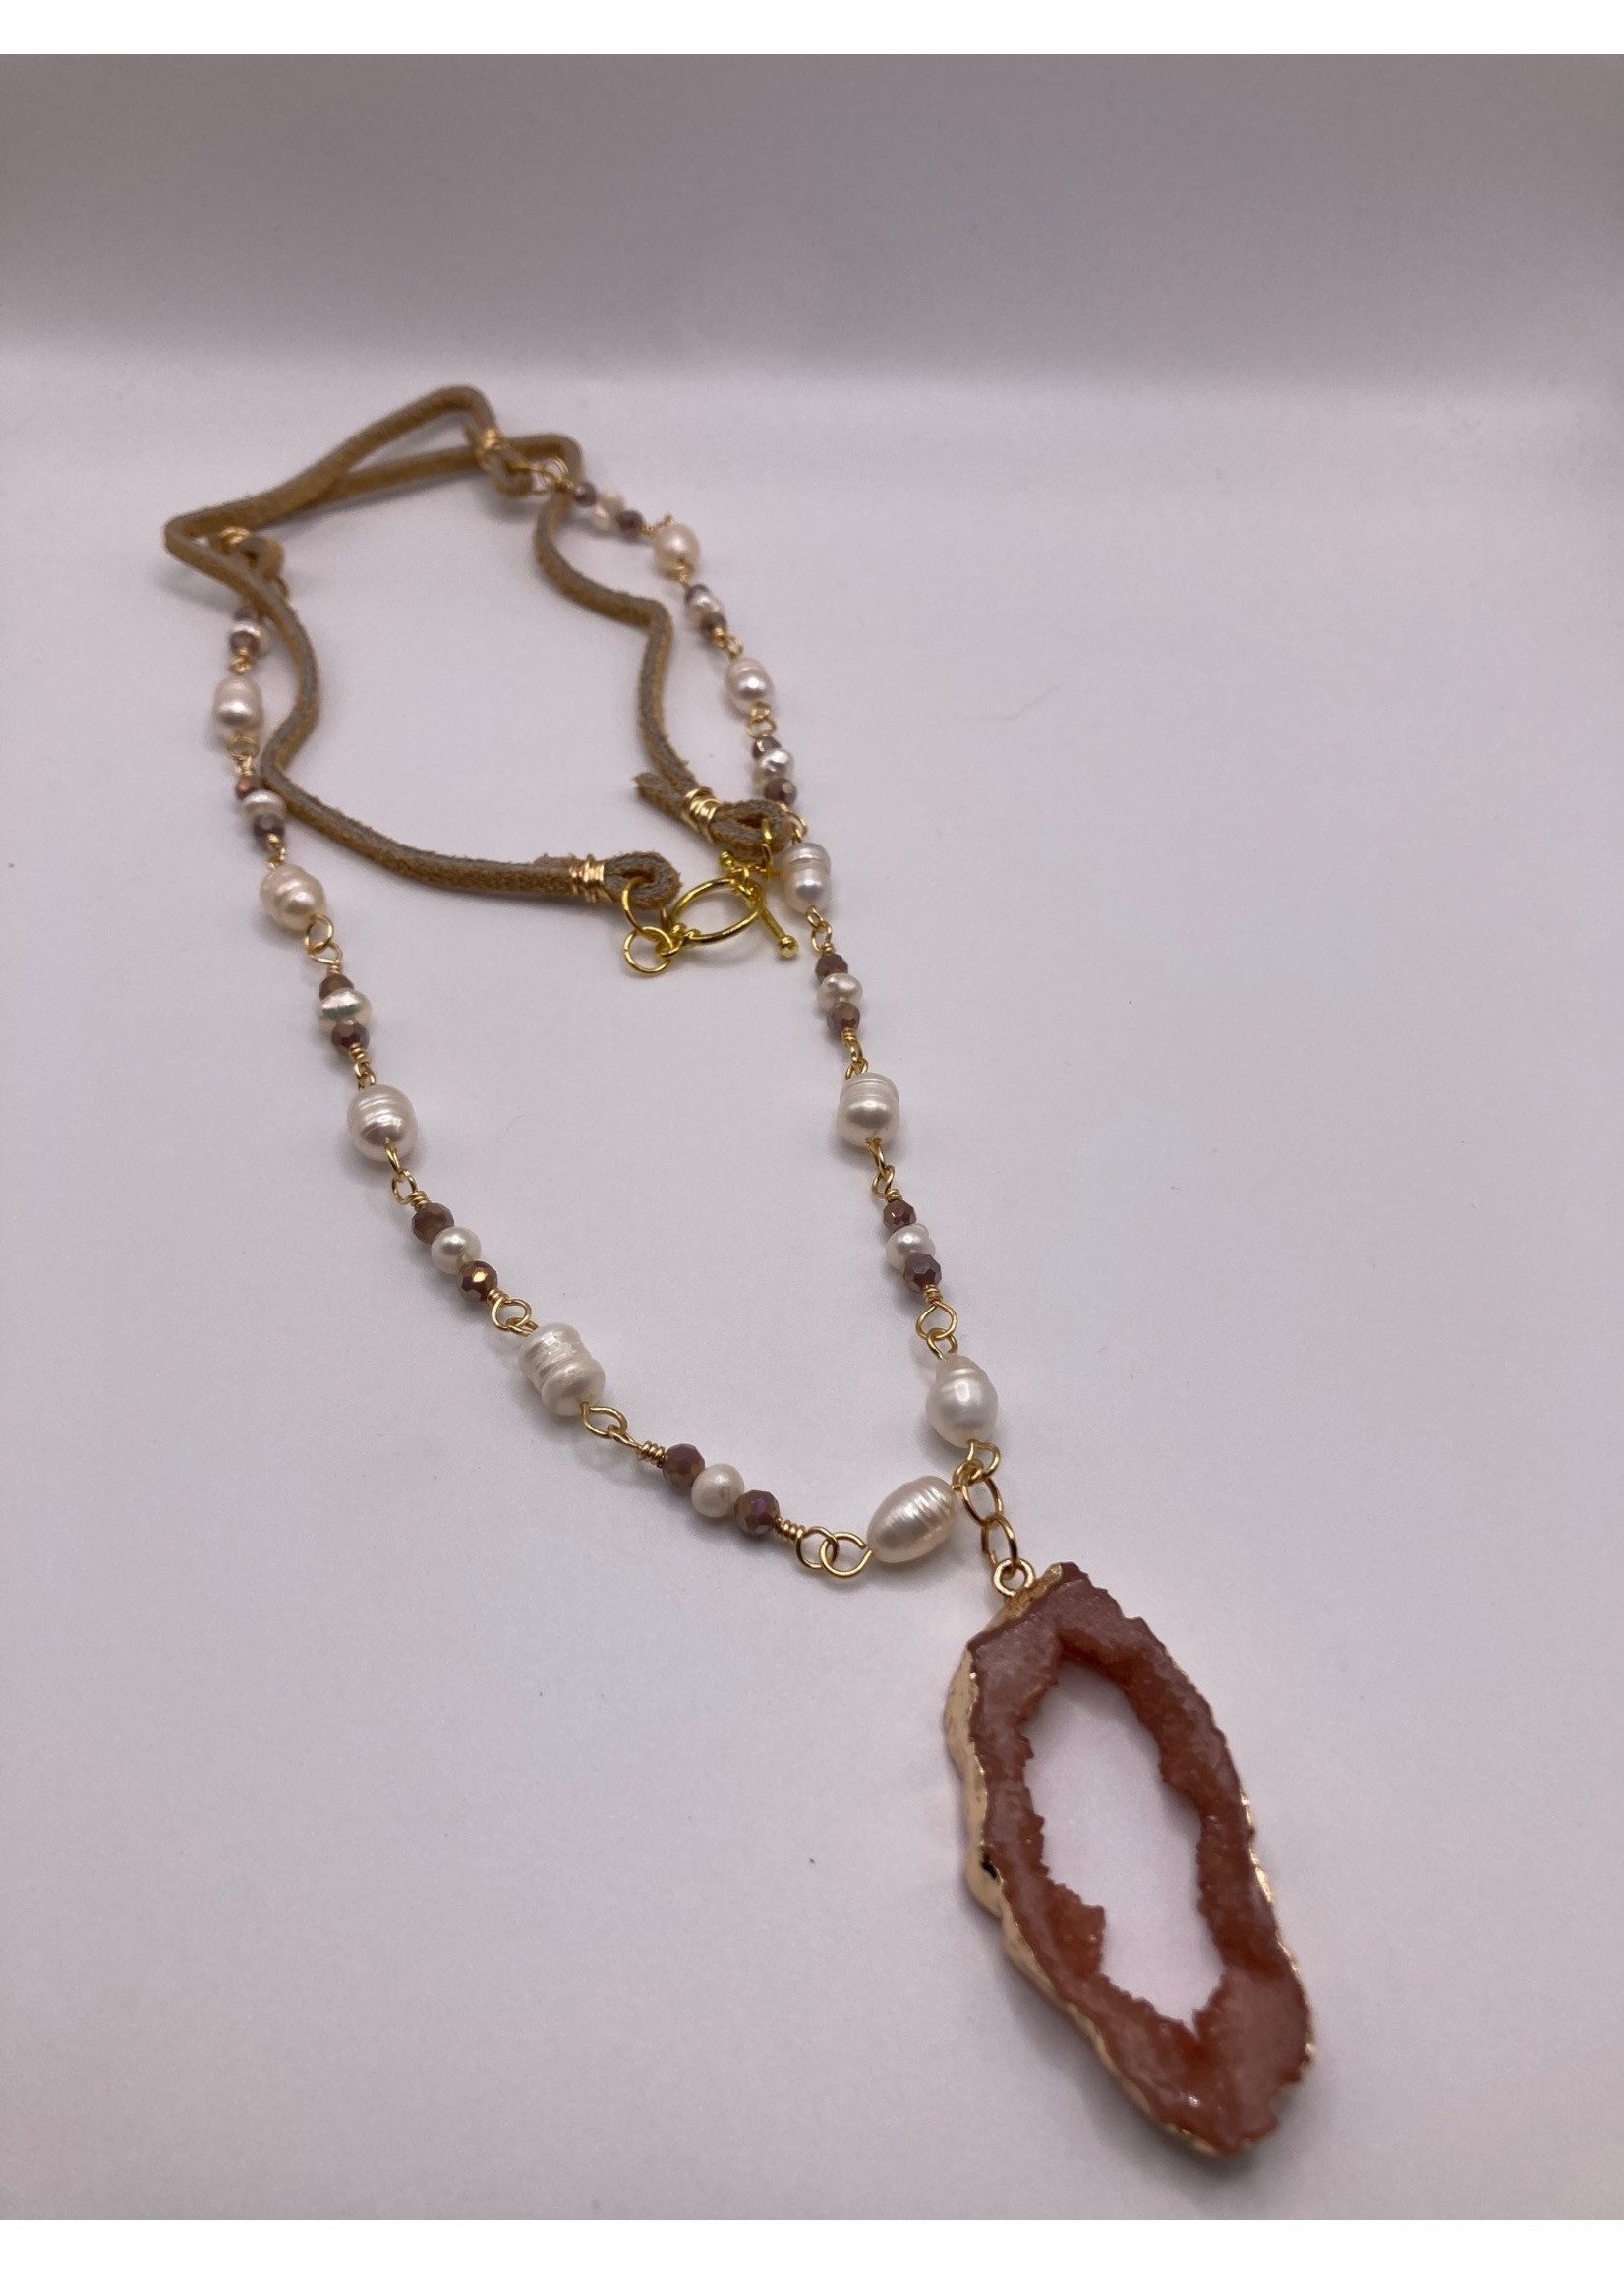 Our Twisted Dahlia N202 Chalcedony Pendant with Freshwater Pearls, Preciosa Crystals, Tan Suede Cording with Gold Wire